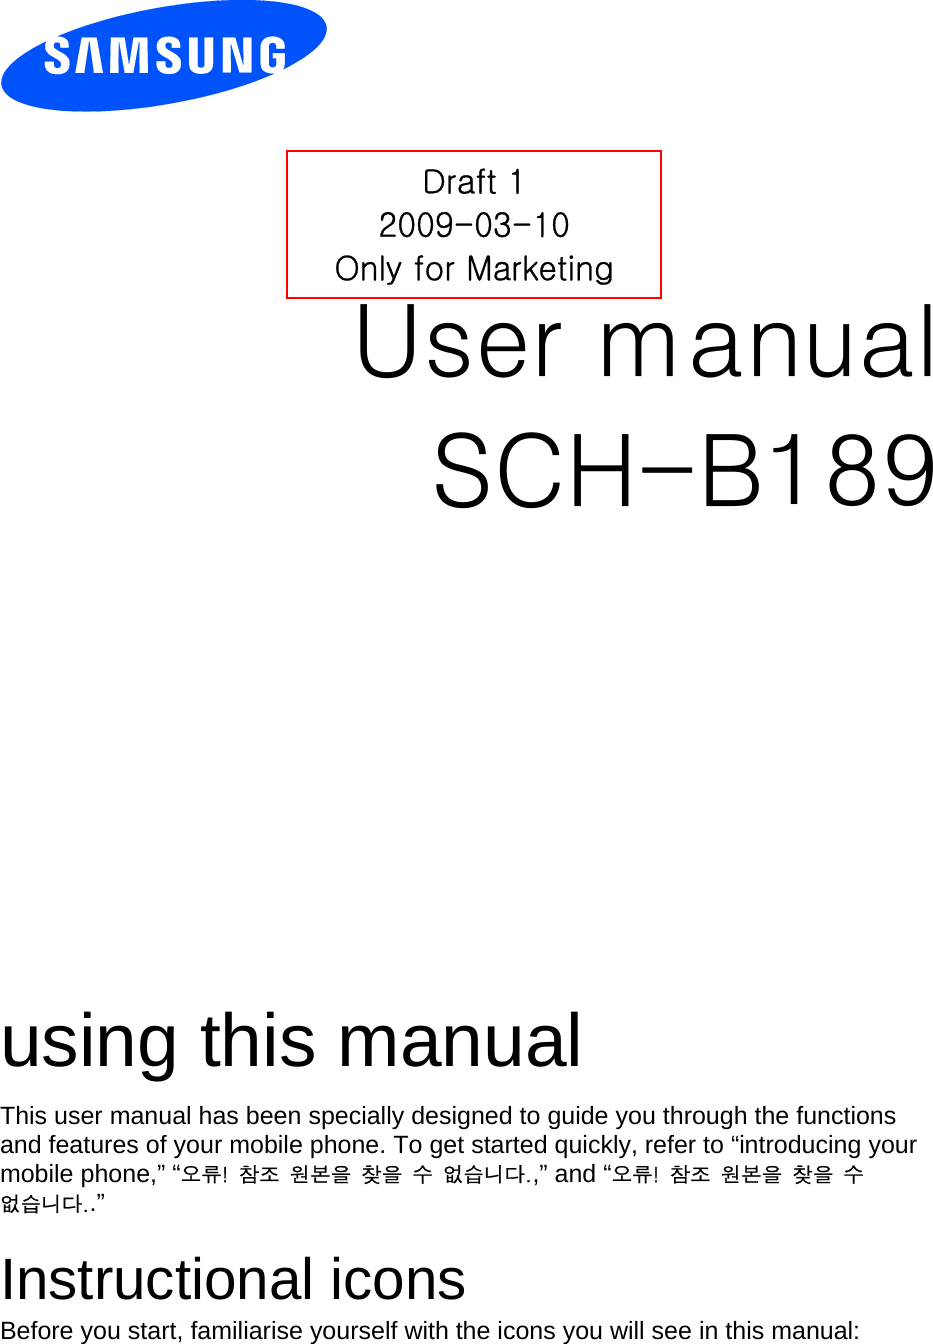          User manual SCH-B189                  using this manual This user manual has been specially designed to guide you through the functions and features of your mobile phone. To get started quickly, refer to “introducing your mobile phone,” “오류!  참조  원본을  찾을  수  없습니다.,” and “오류!  참조  원본을  찾을  수 없습니다..”  Instructional icons Before you start, familiarise yourself with the icons you will see in this manual:   Draft 1 2009-03-10 Only for Marketing 